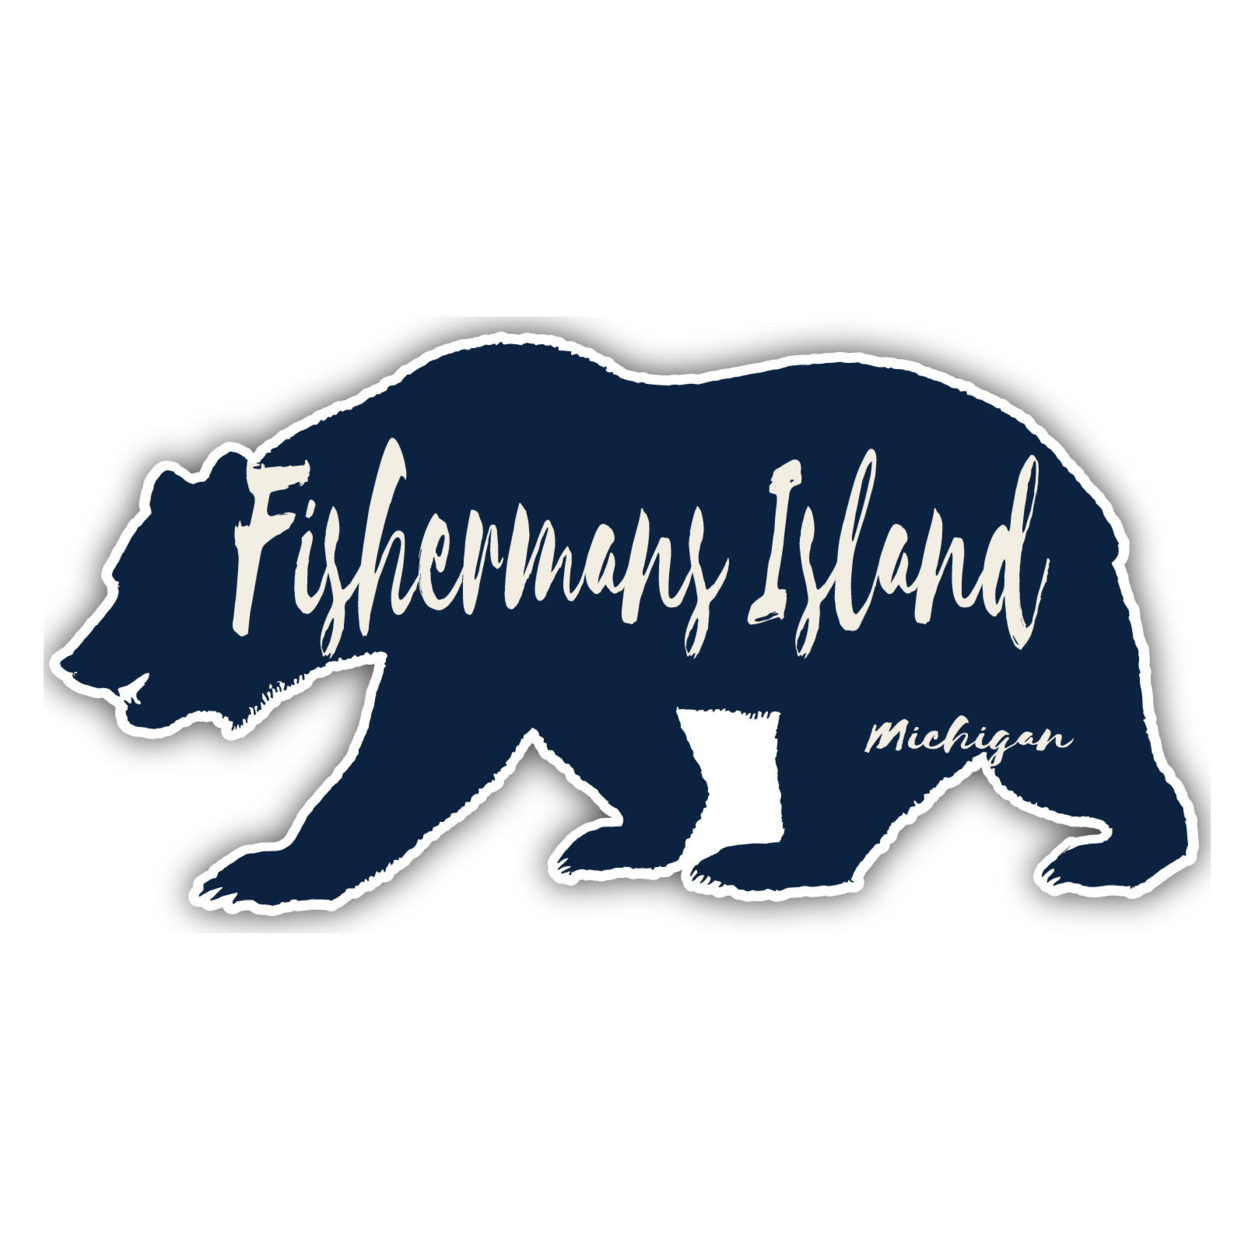 Fishermans Island Michigan Souvenir Decorative Stickers (Choose Theme And Size) - 4-Pack, 6-Inch, Bear